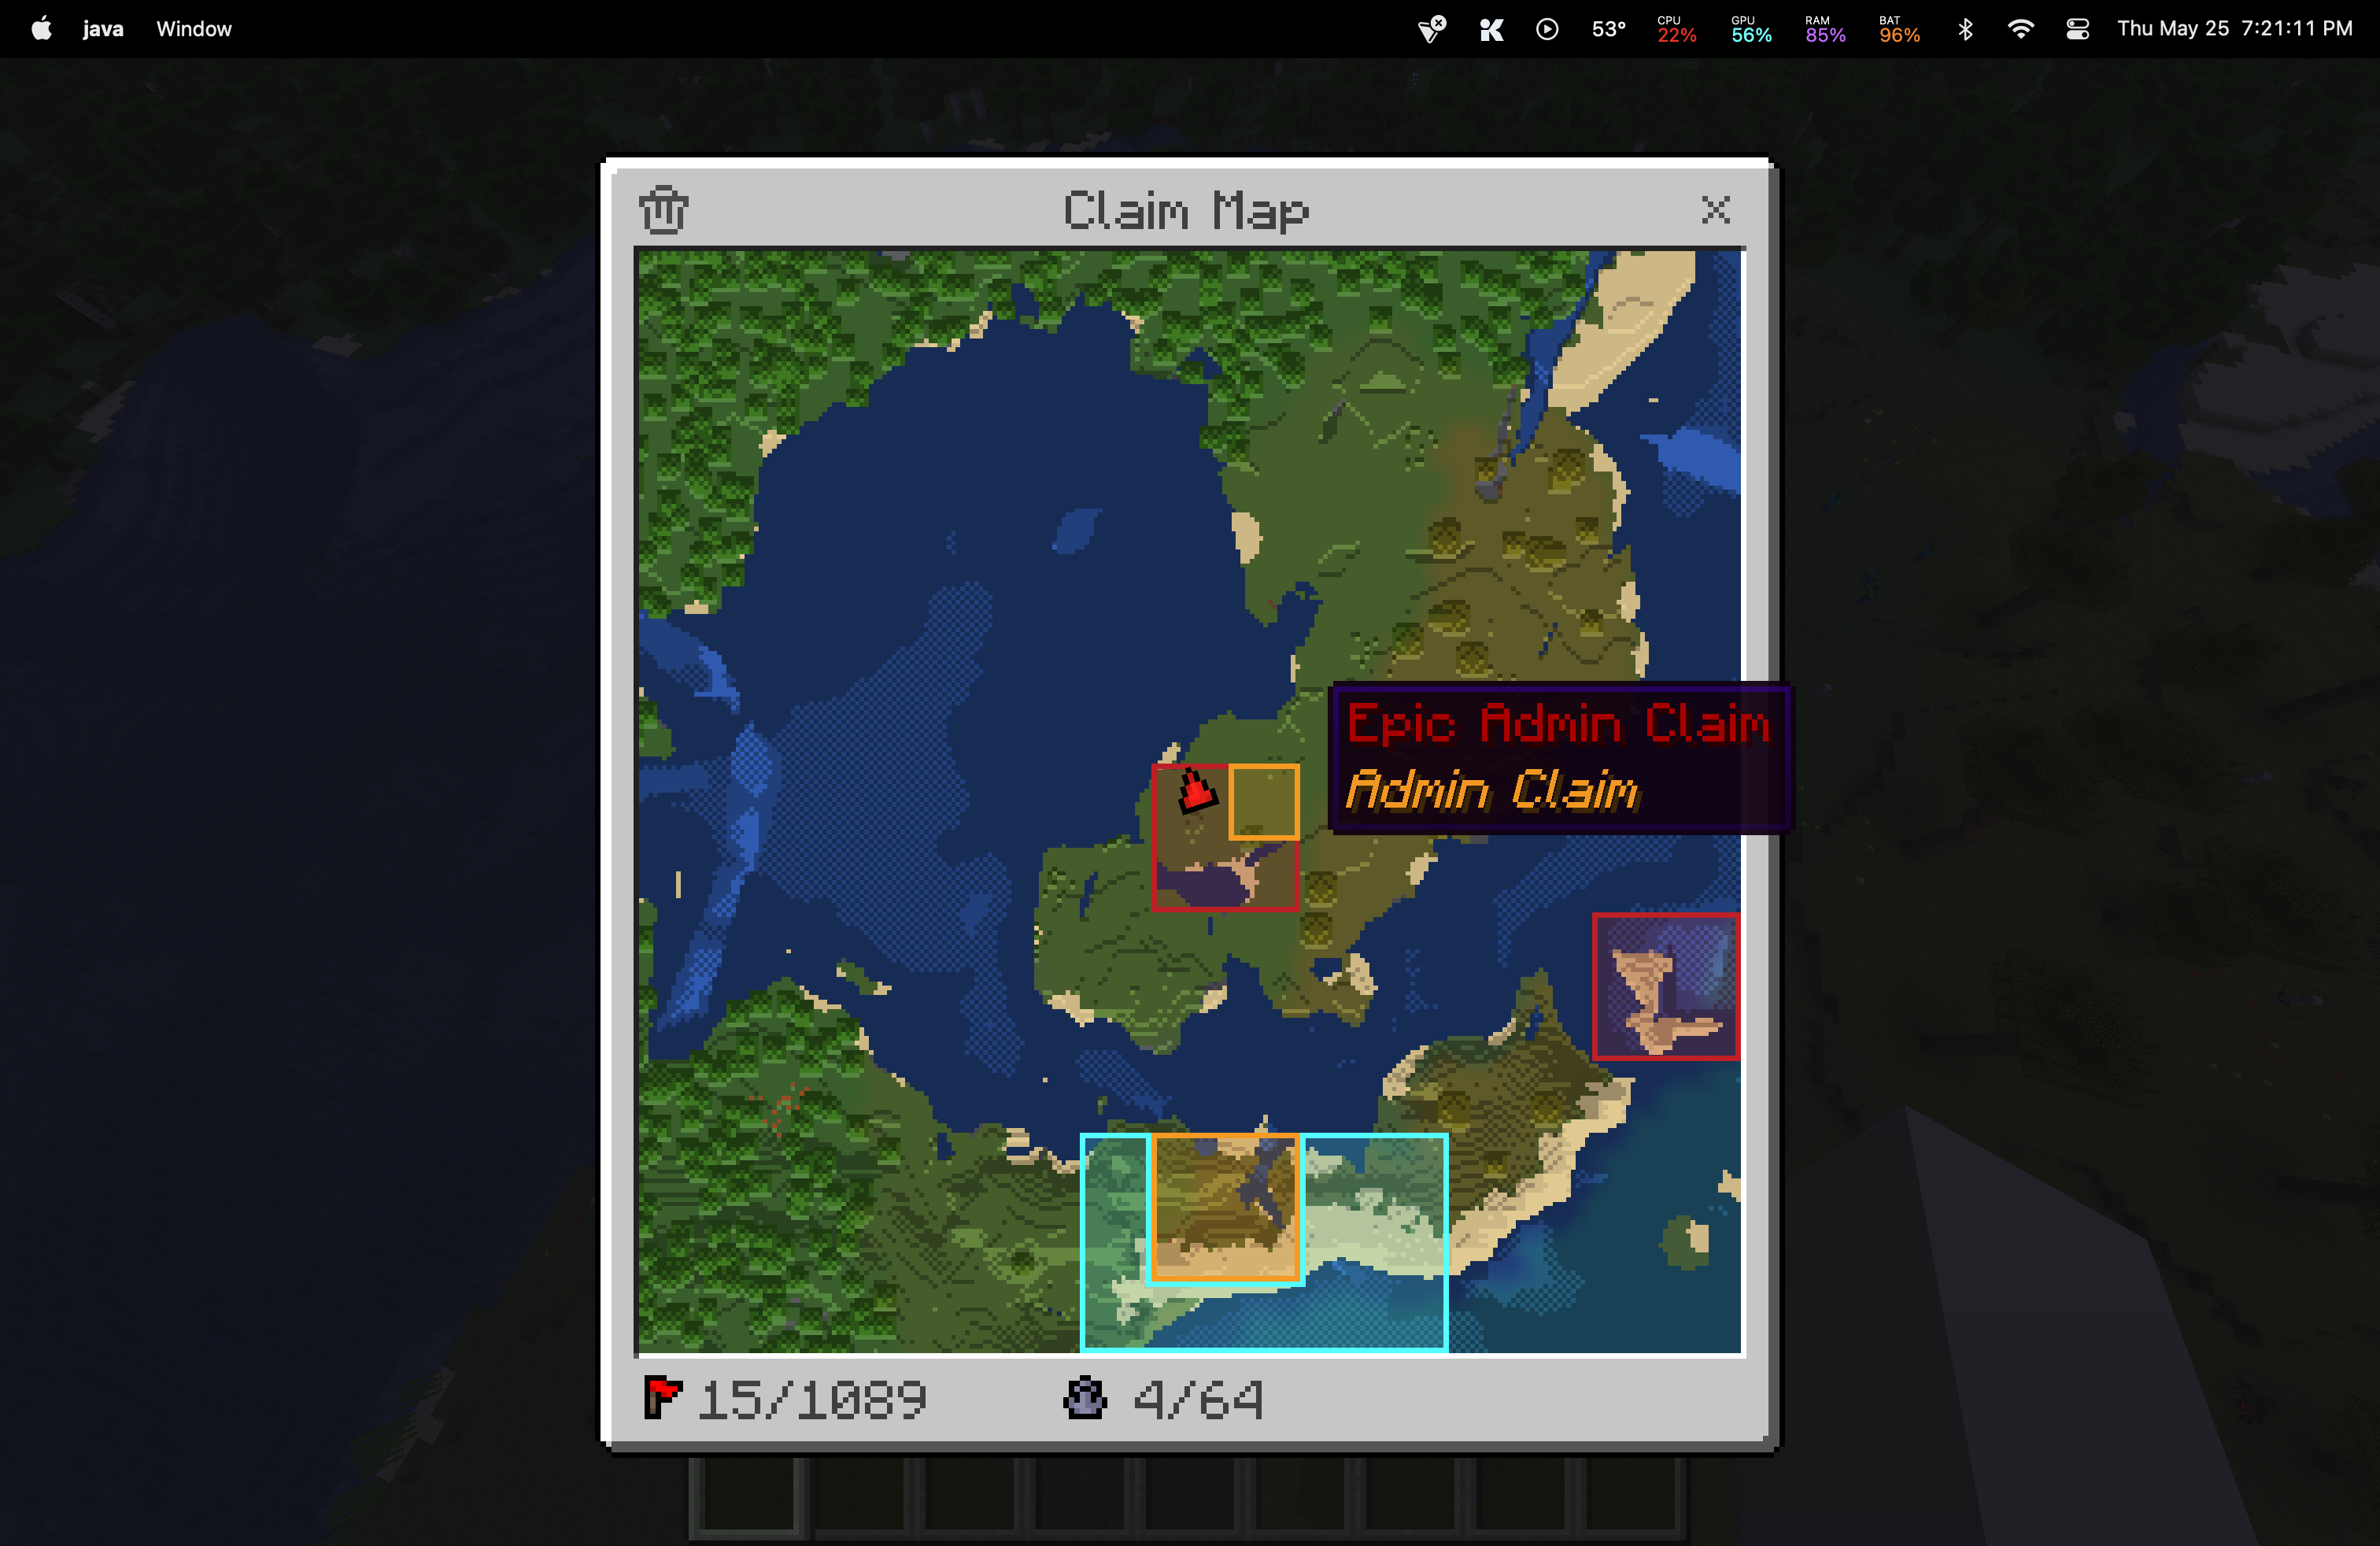 Epic admin claim shown on map